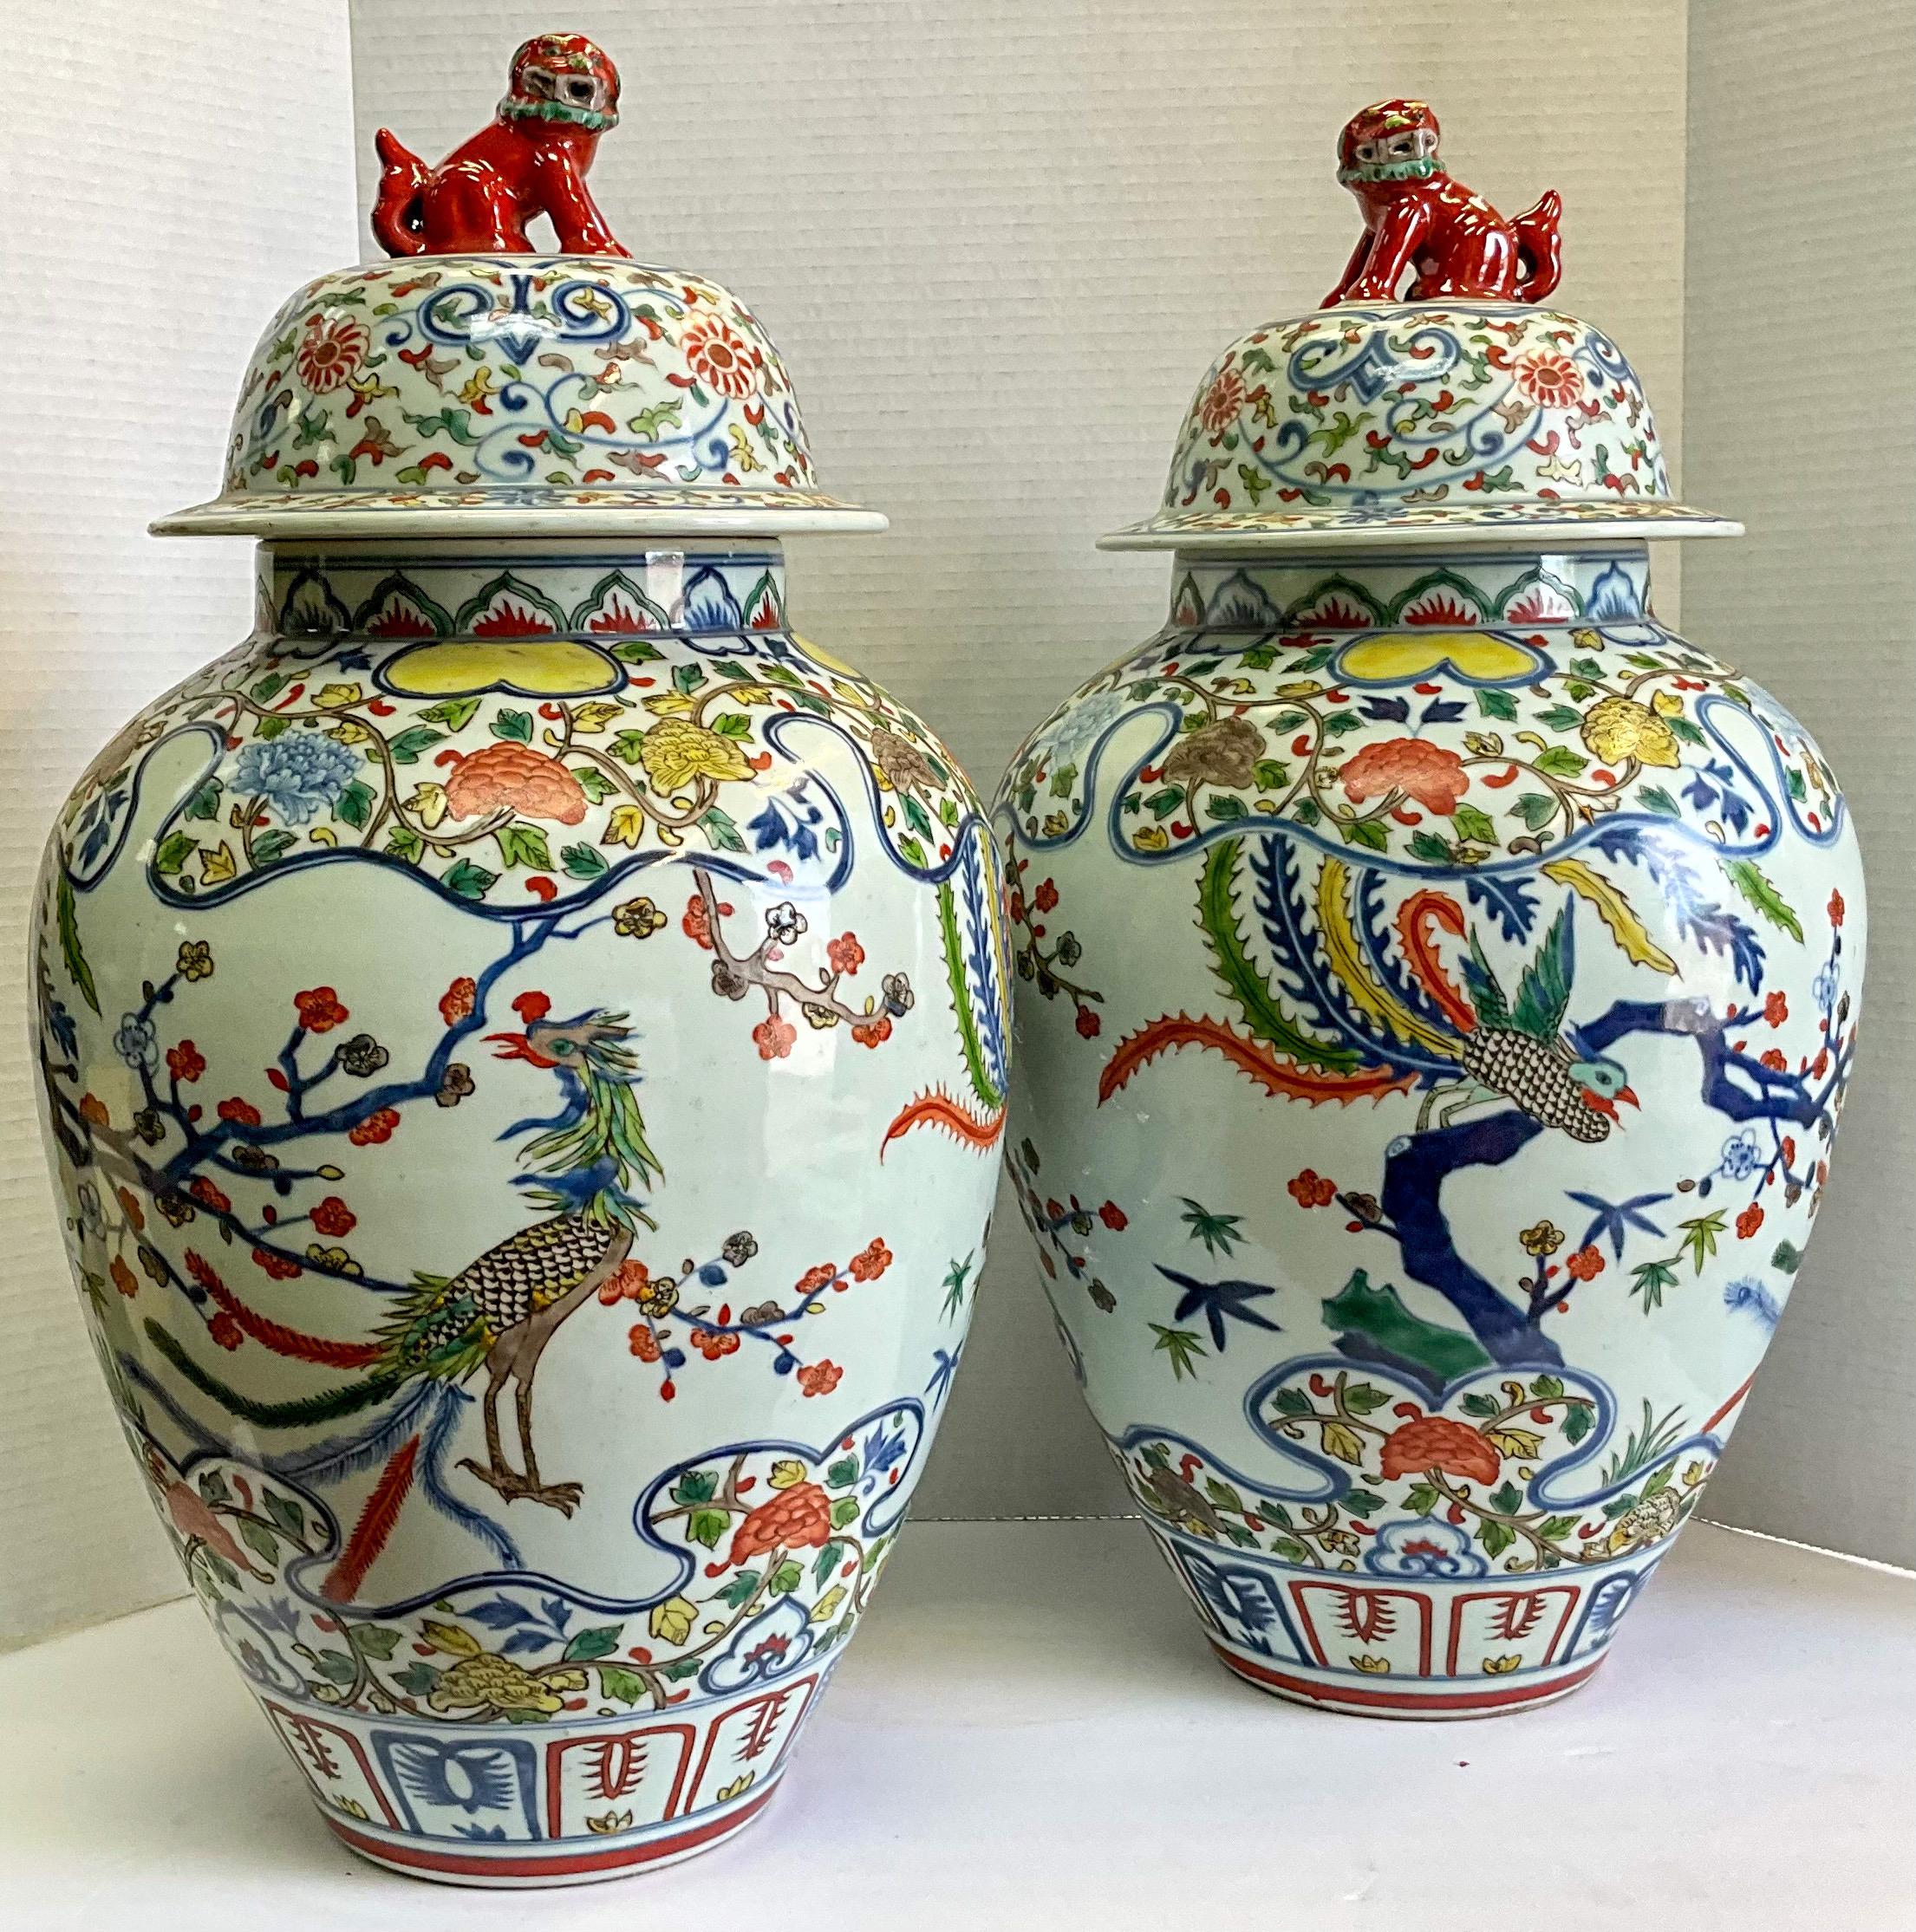 This is a pair of large scale Chinese ginger jars with vivid bird motifs and bright coral foo dog finials. The birds appear to be some sort of pheasant. The colors really make them quite unique. They are marked.